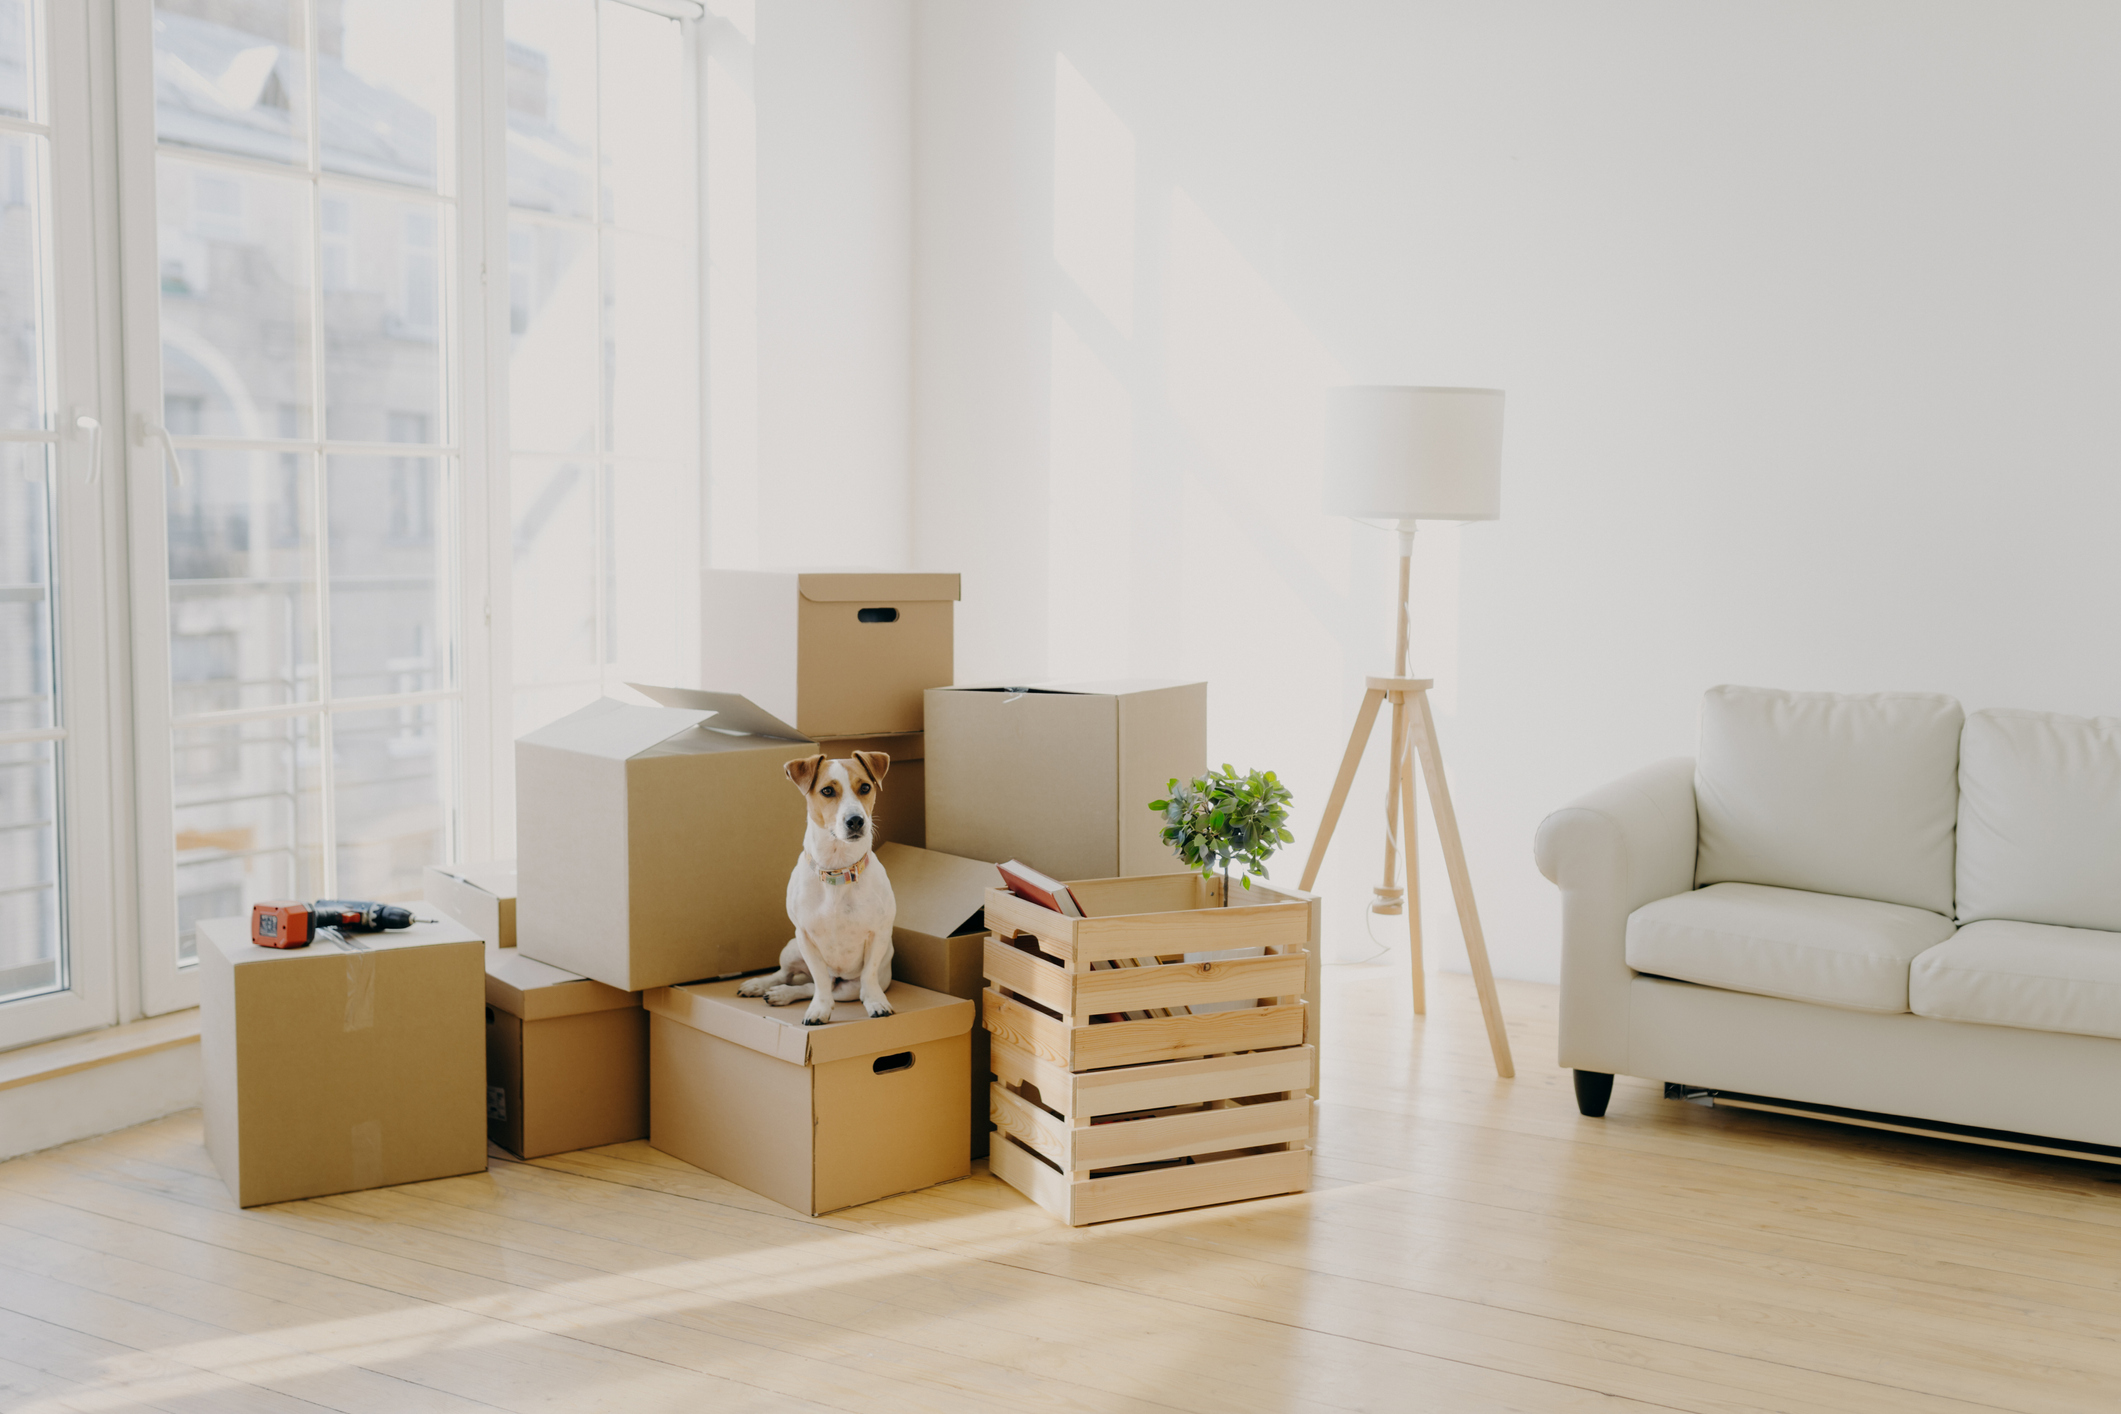 A Jack Russel terrier sits on moving boxes in a large white living room